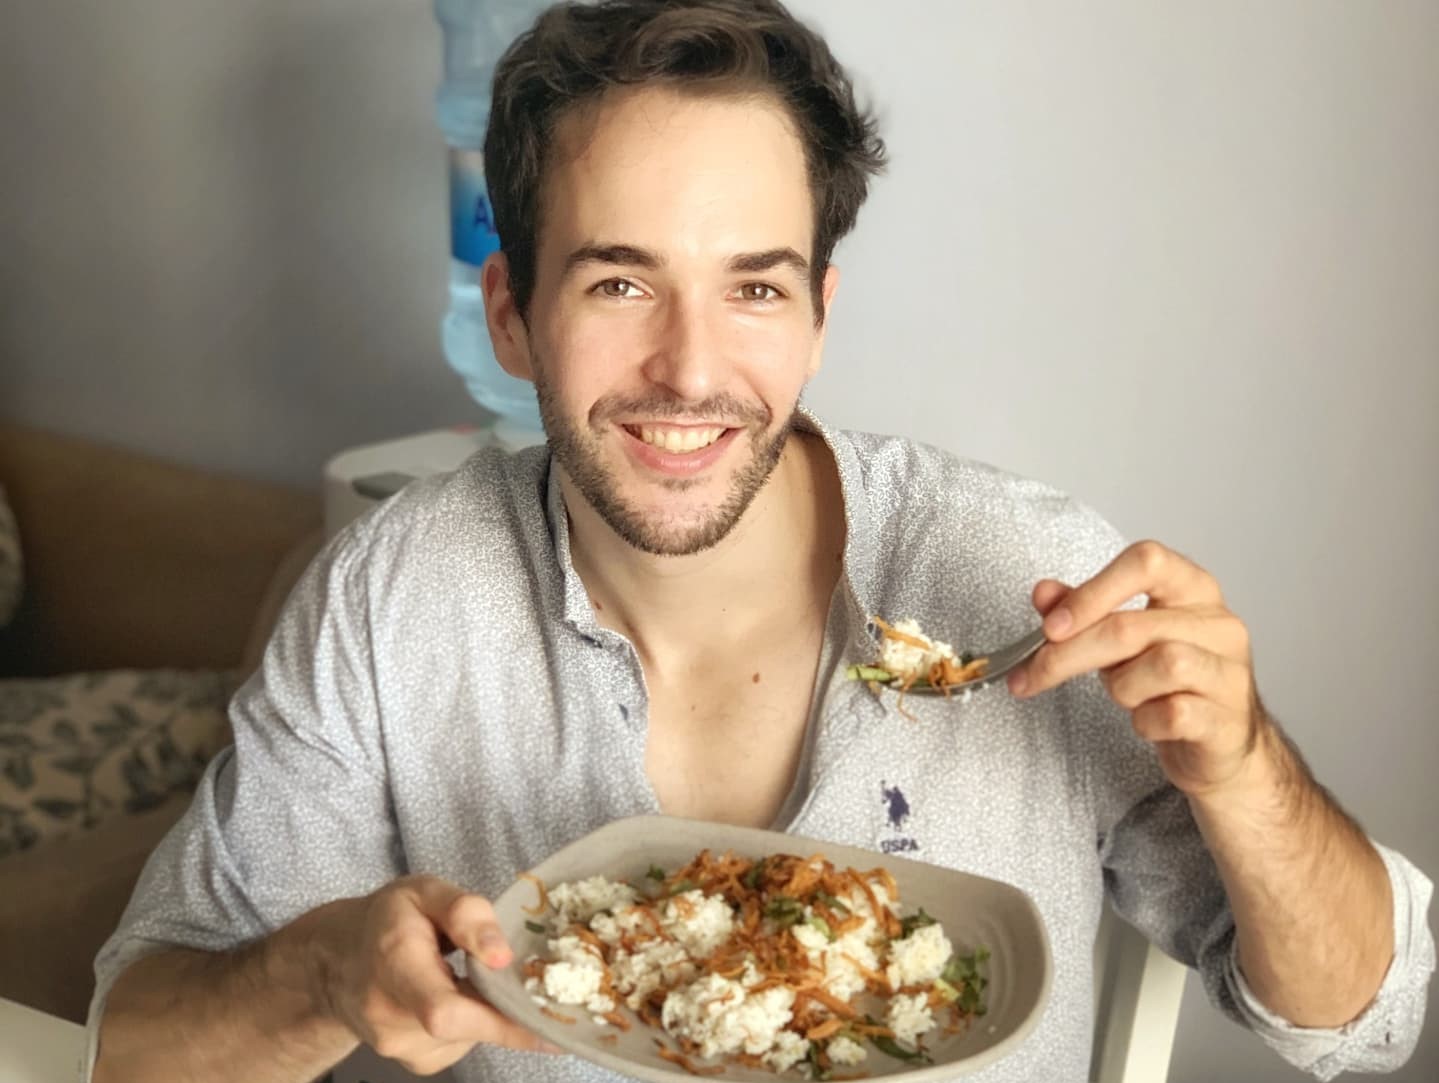 Frenchman earns massive local fandom thanks to his love of Vietnamese food